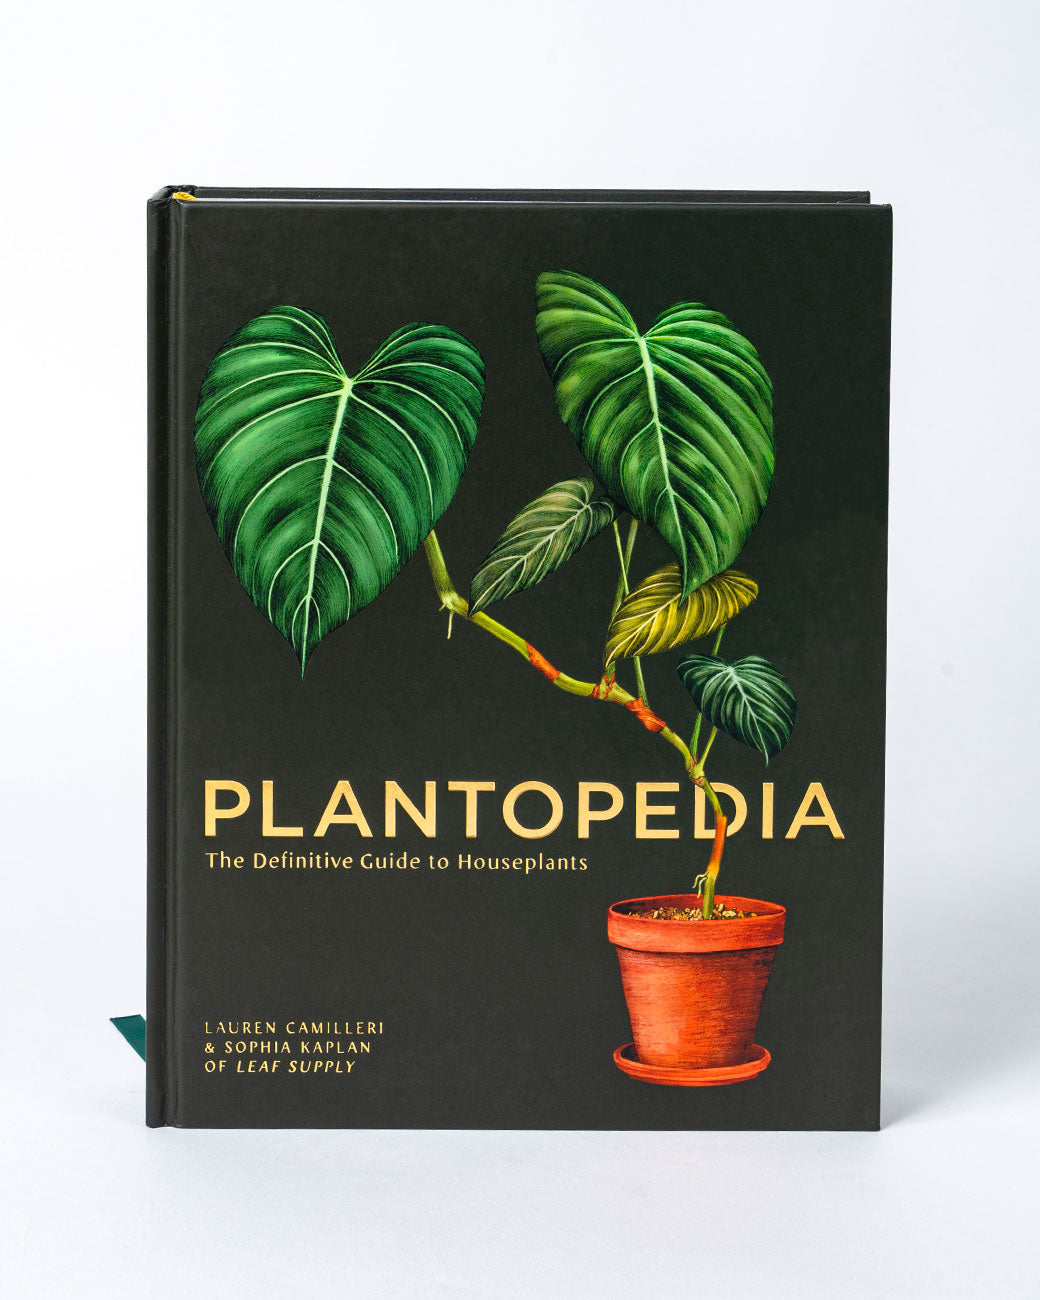 Cover of the Plantopedia book.